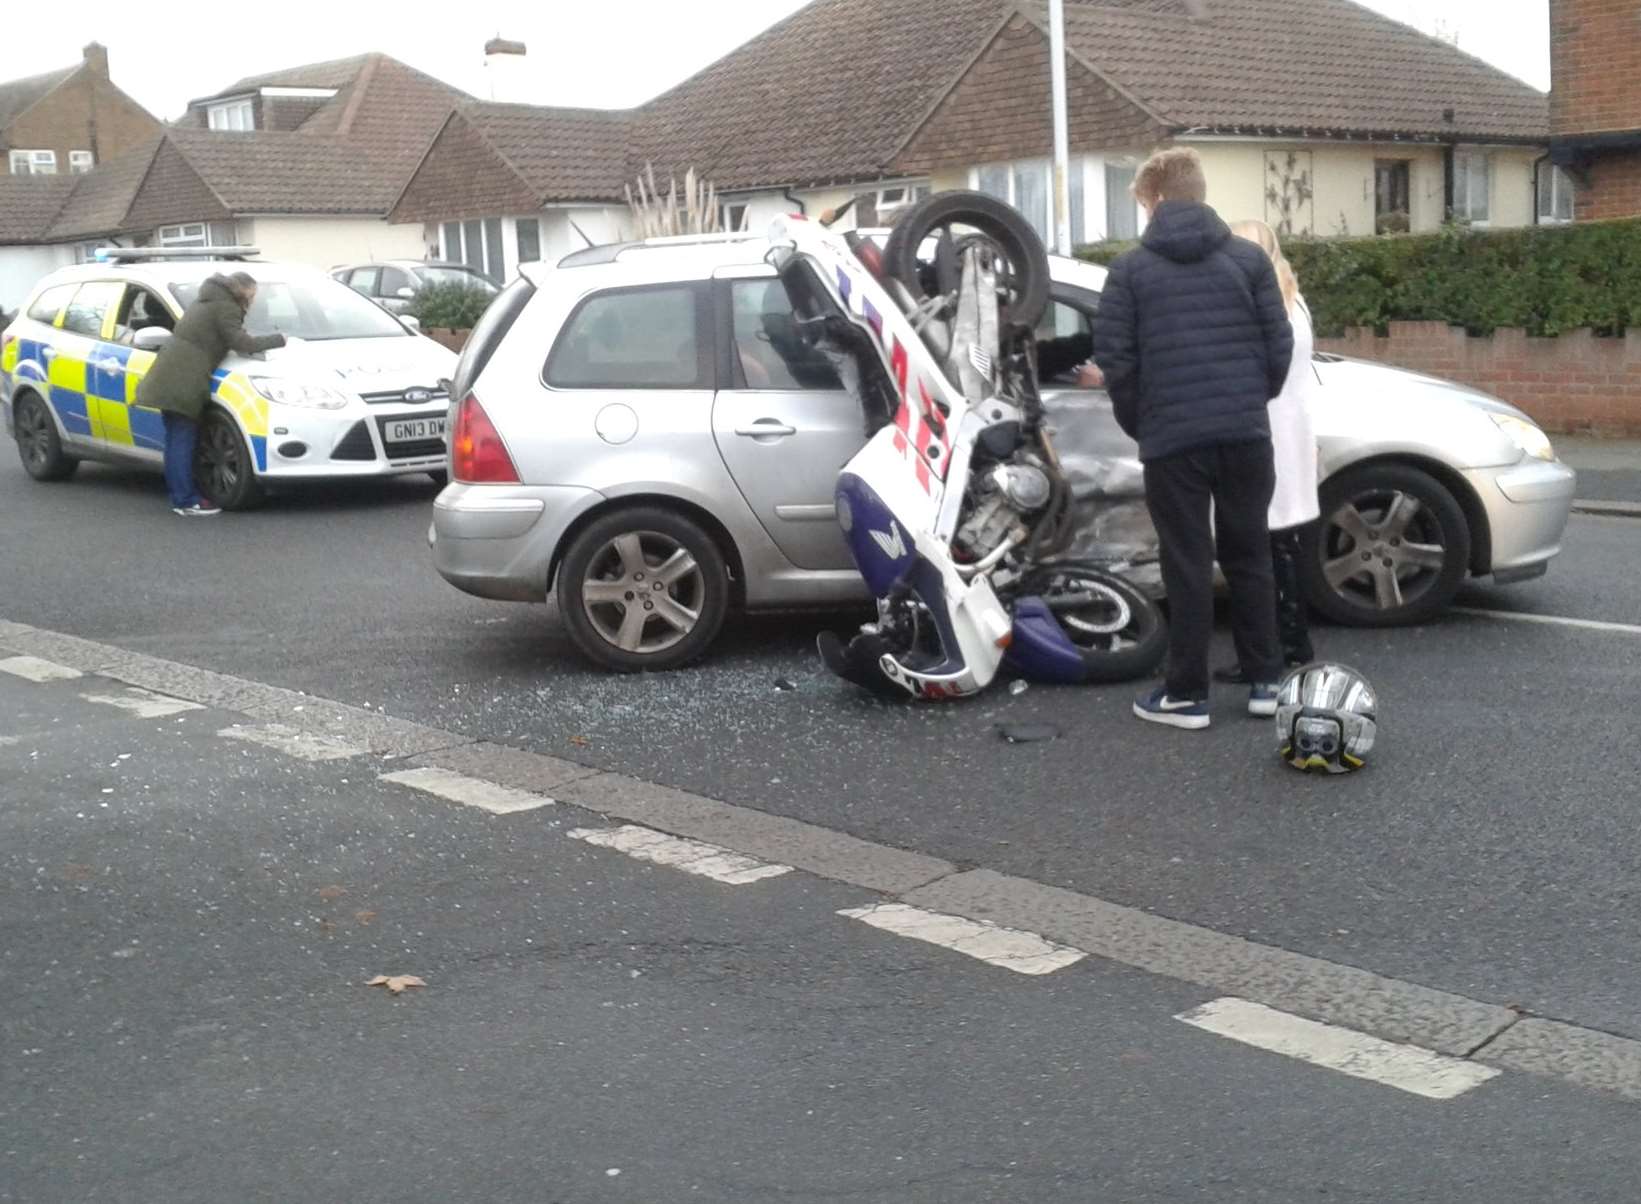 The crash happened near Northdown Primary School, Margate. Picture: @traceyrozier